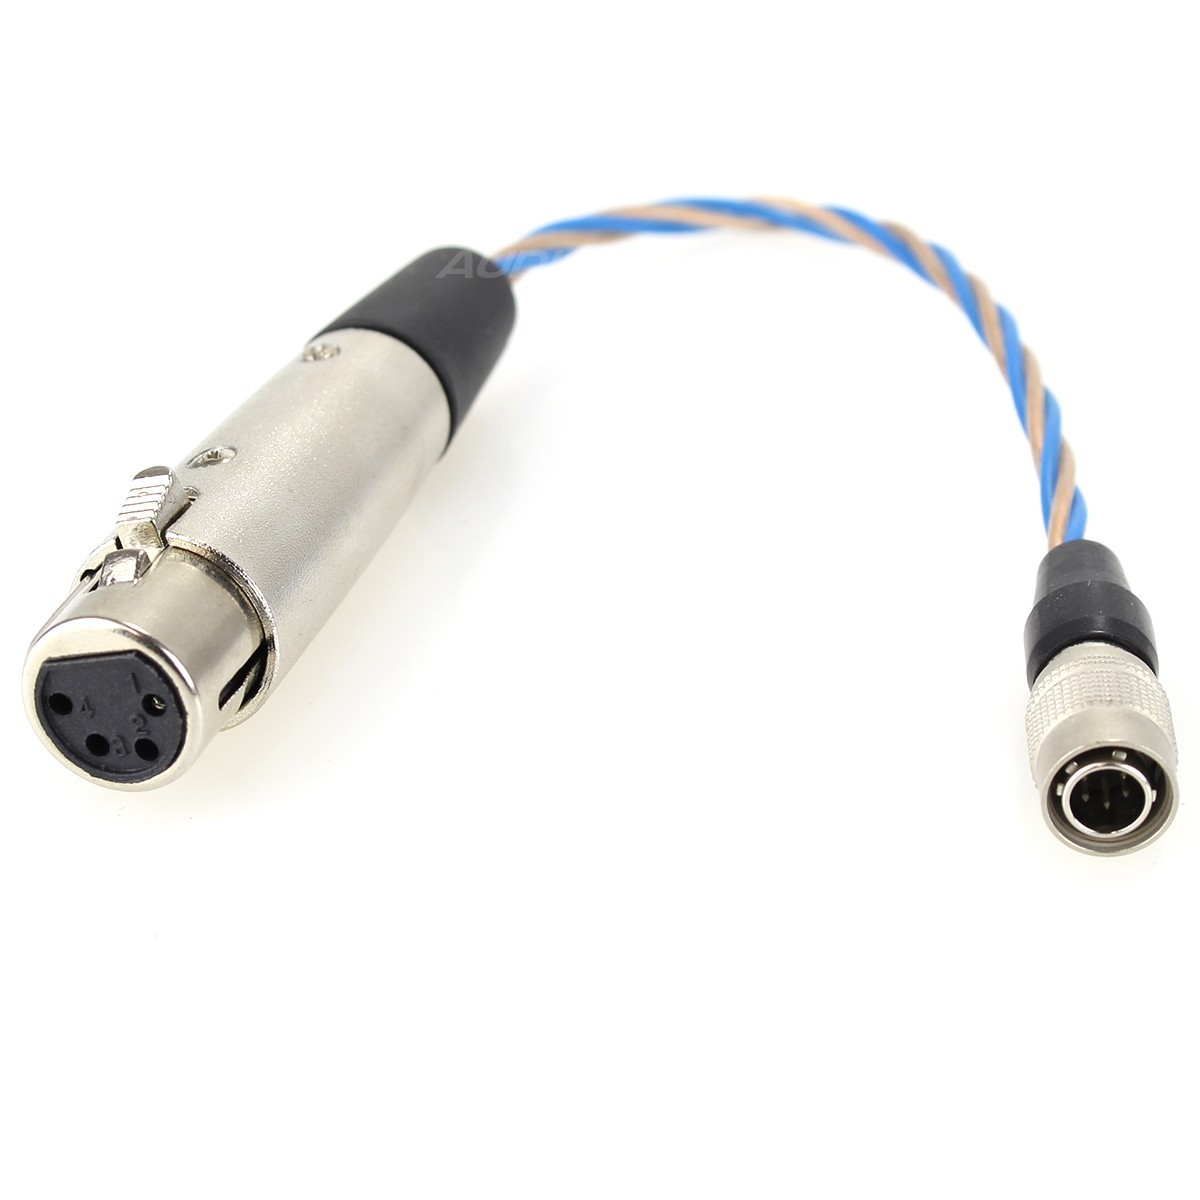 iBasso CB11 interconnect XLR 4 pin female Cable to HR10A male